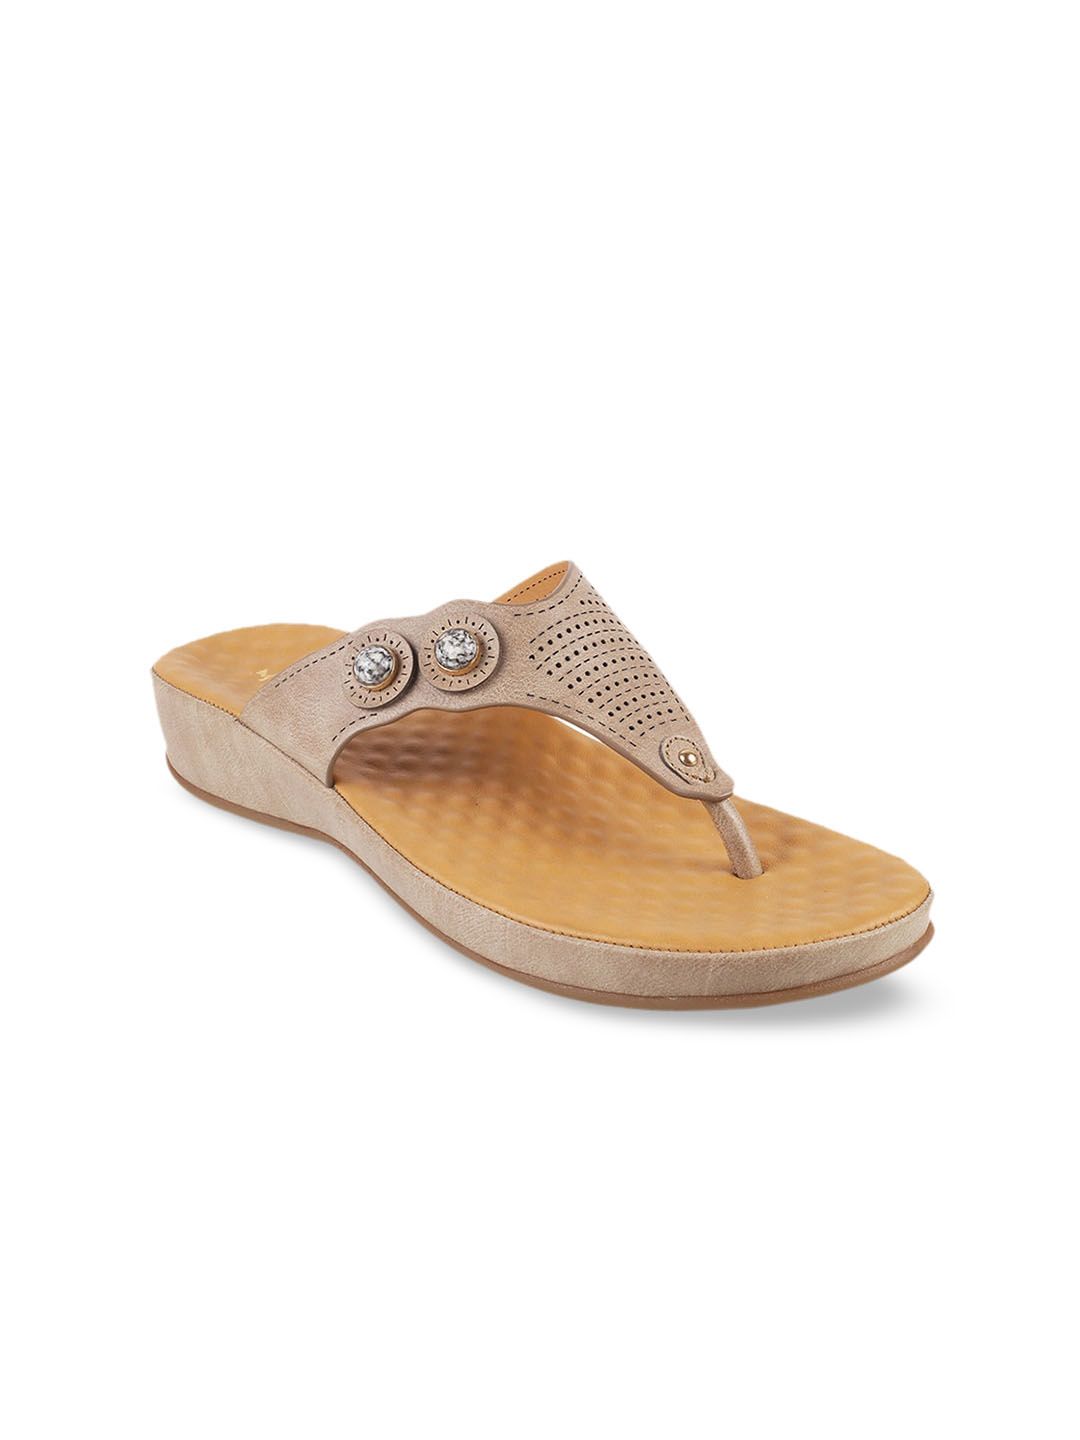 Mochi Women Tan Embellished Sandals Price in India